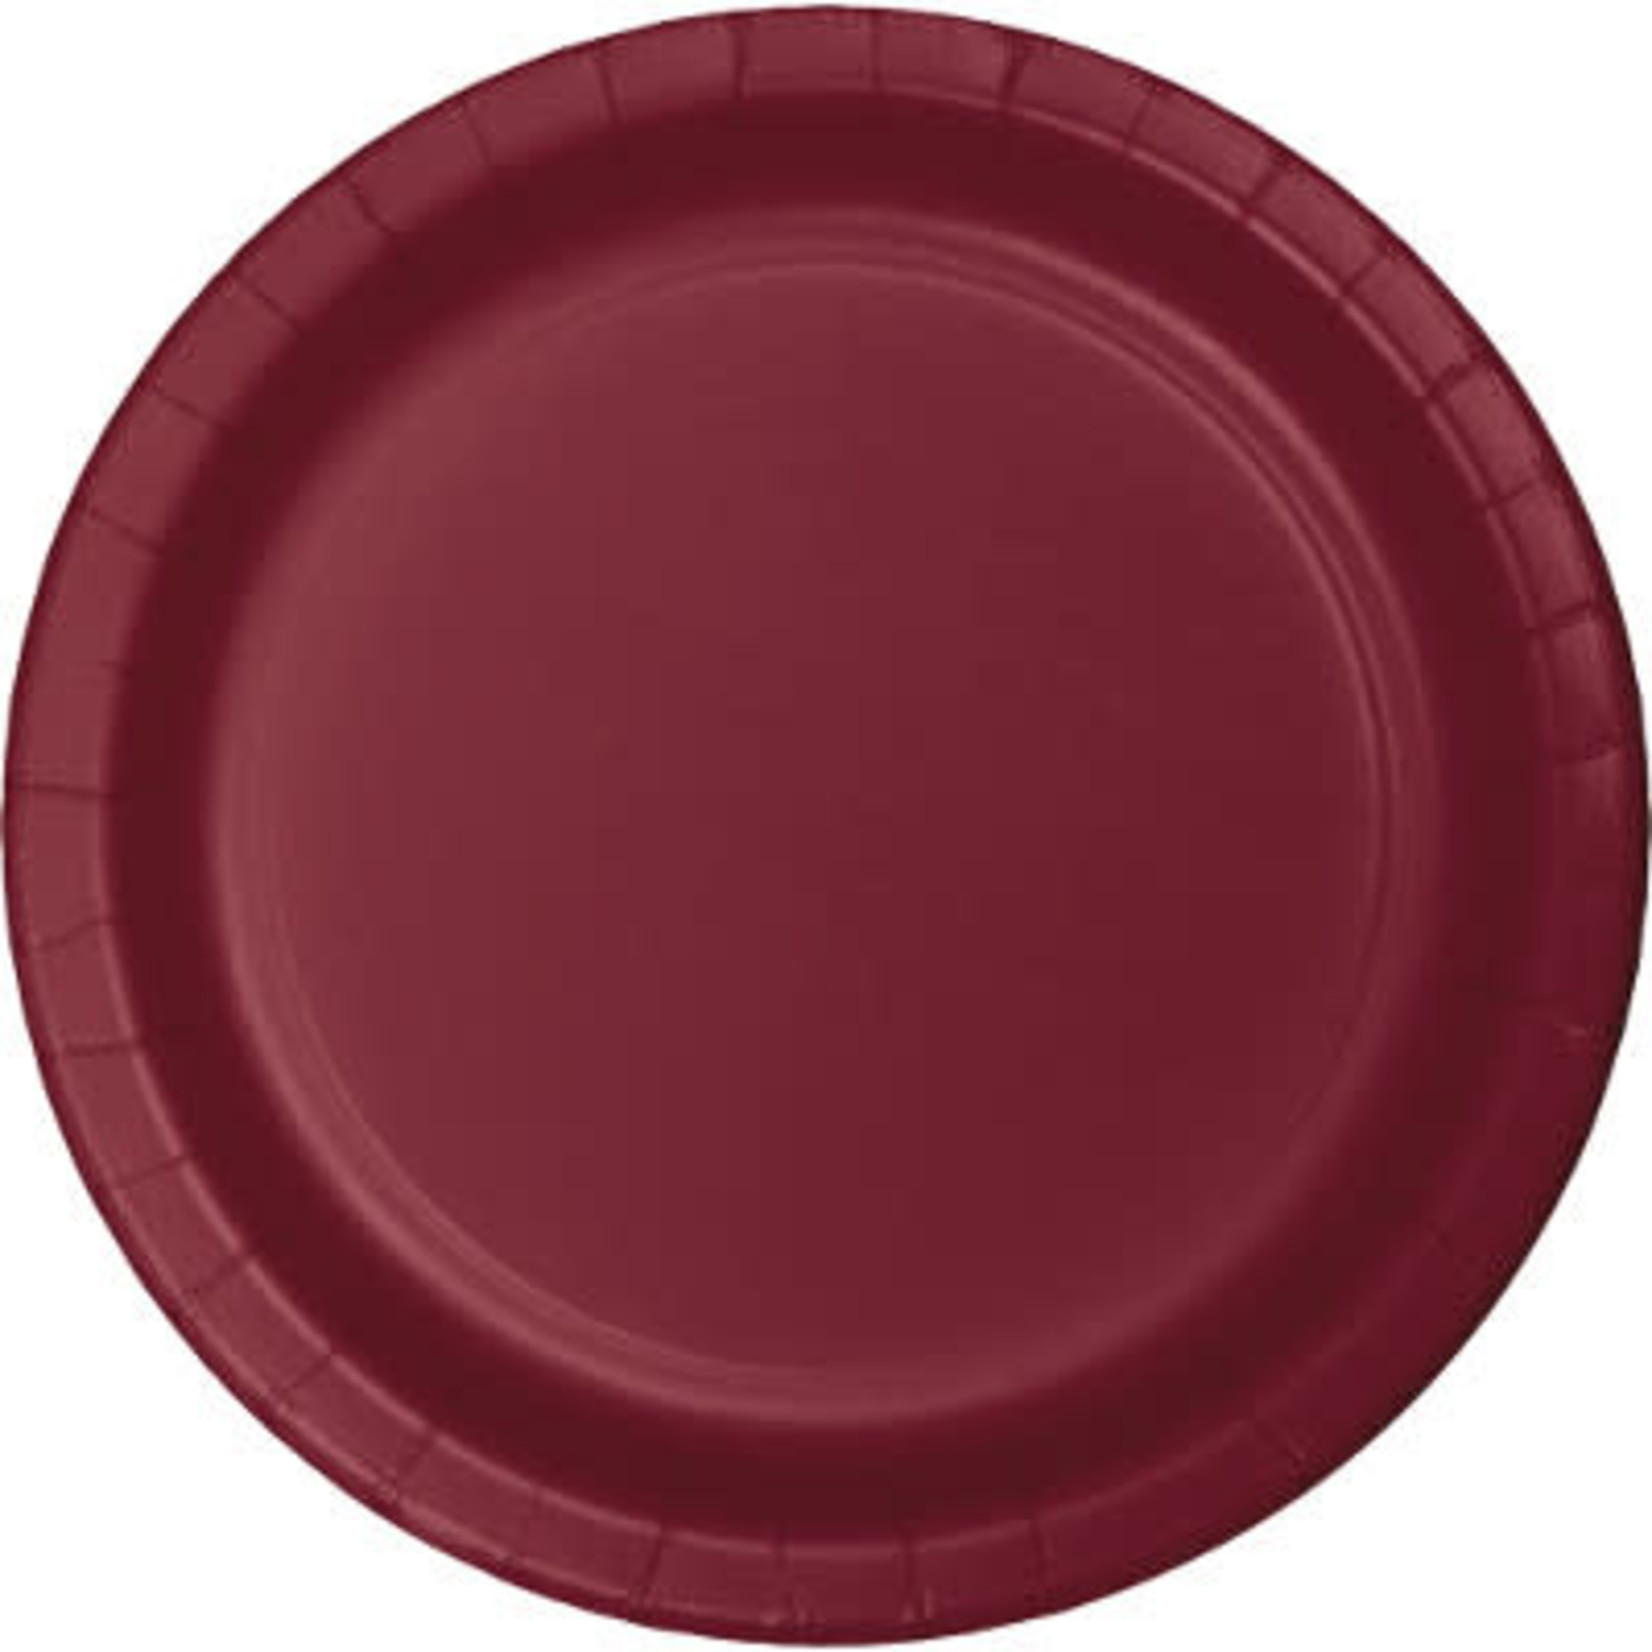 Touch of Color 10" Burgundy Paper Banquet Plates - 24ct.